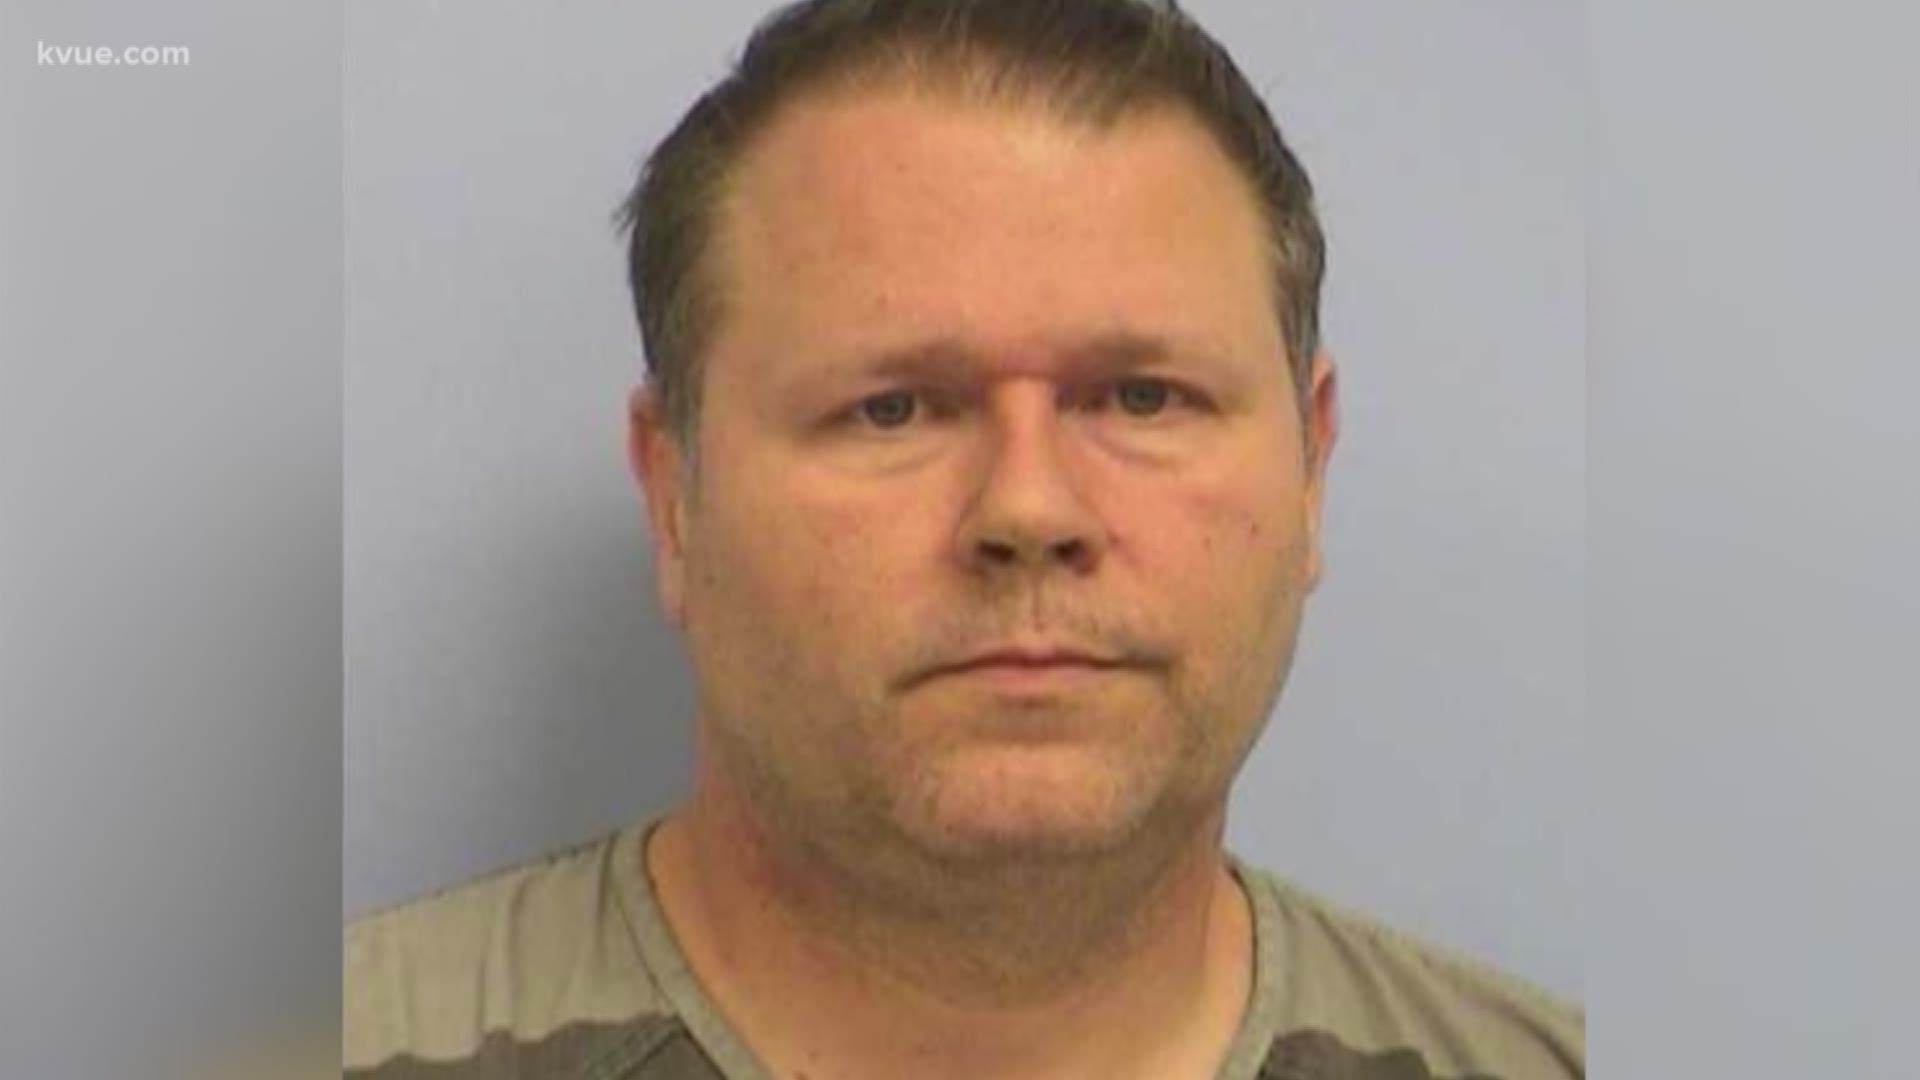 A Pflugerville man was charged with voyeurism and invasive visual recording after multiple cameras were found in a 13-year-old girl's room.